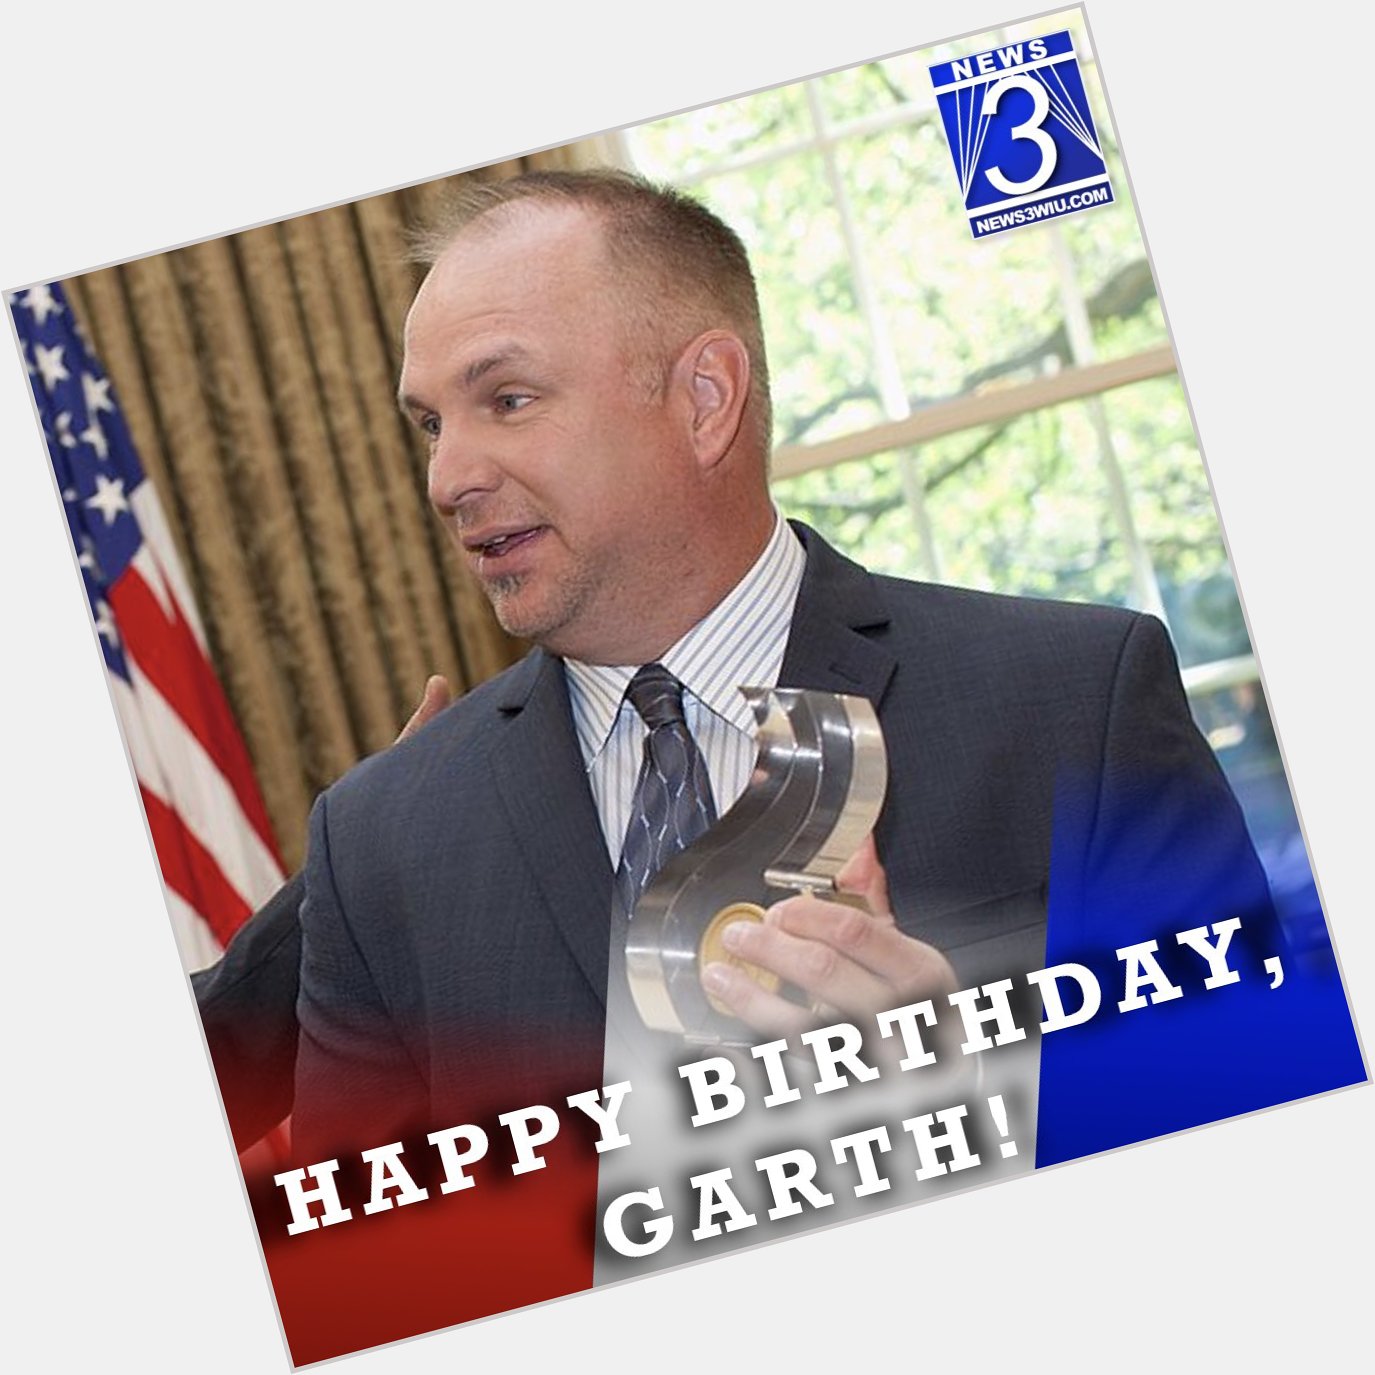 Happy birthday to Garth Brooks! The country music singer turns 57 today! 